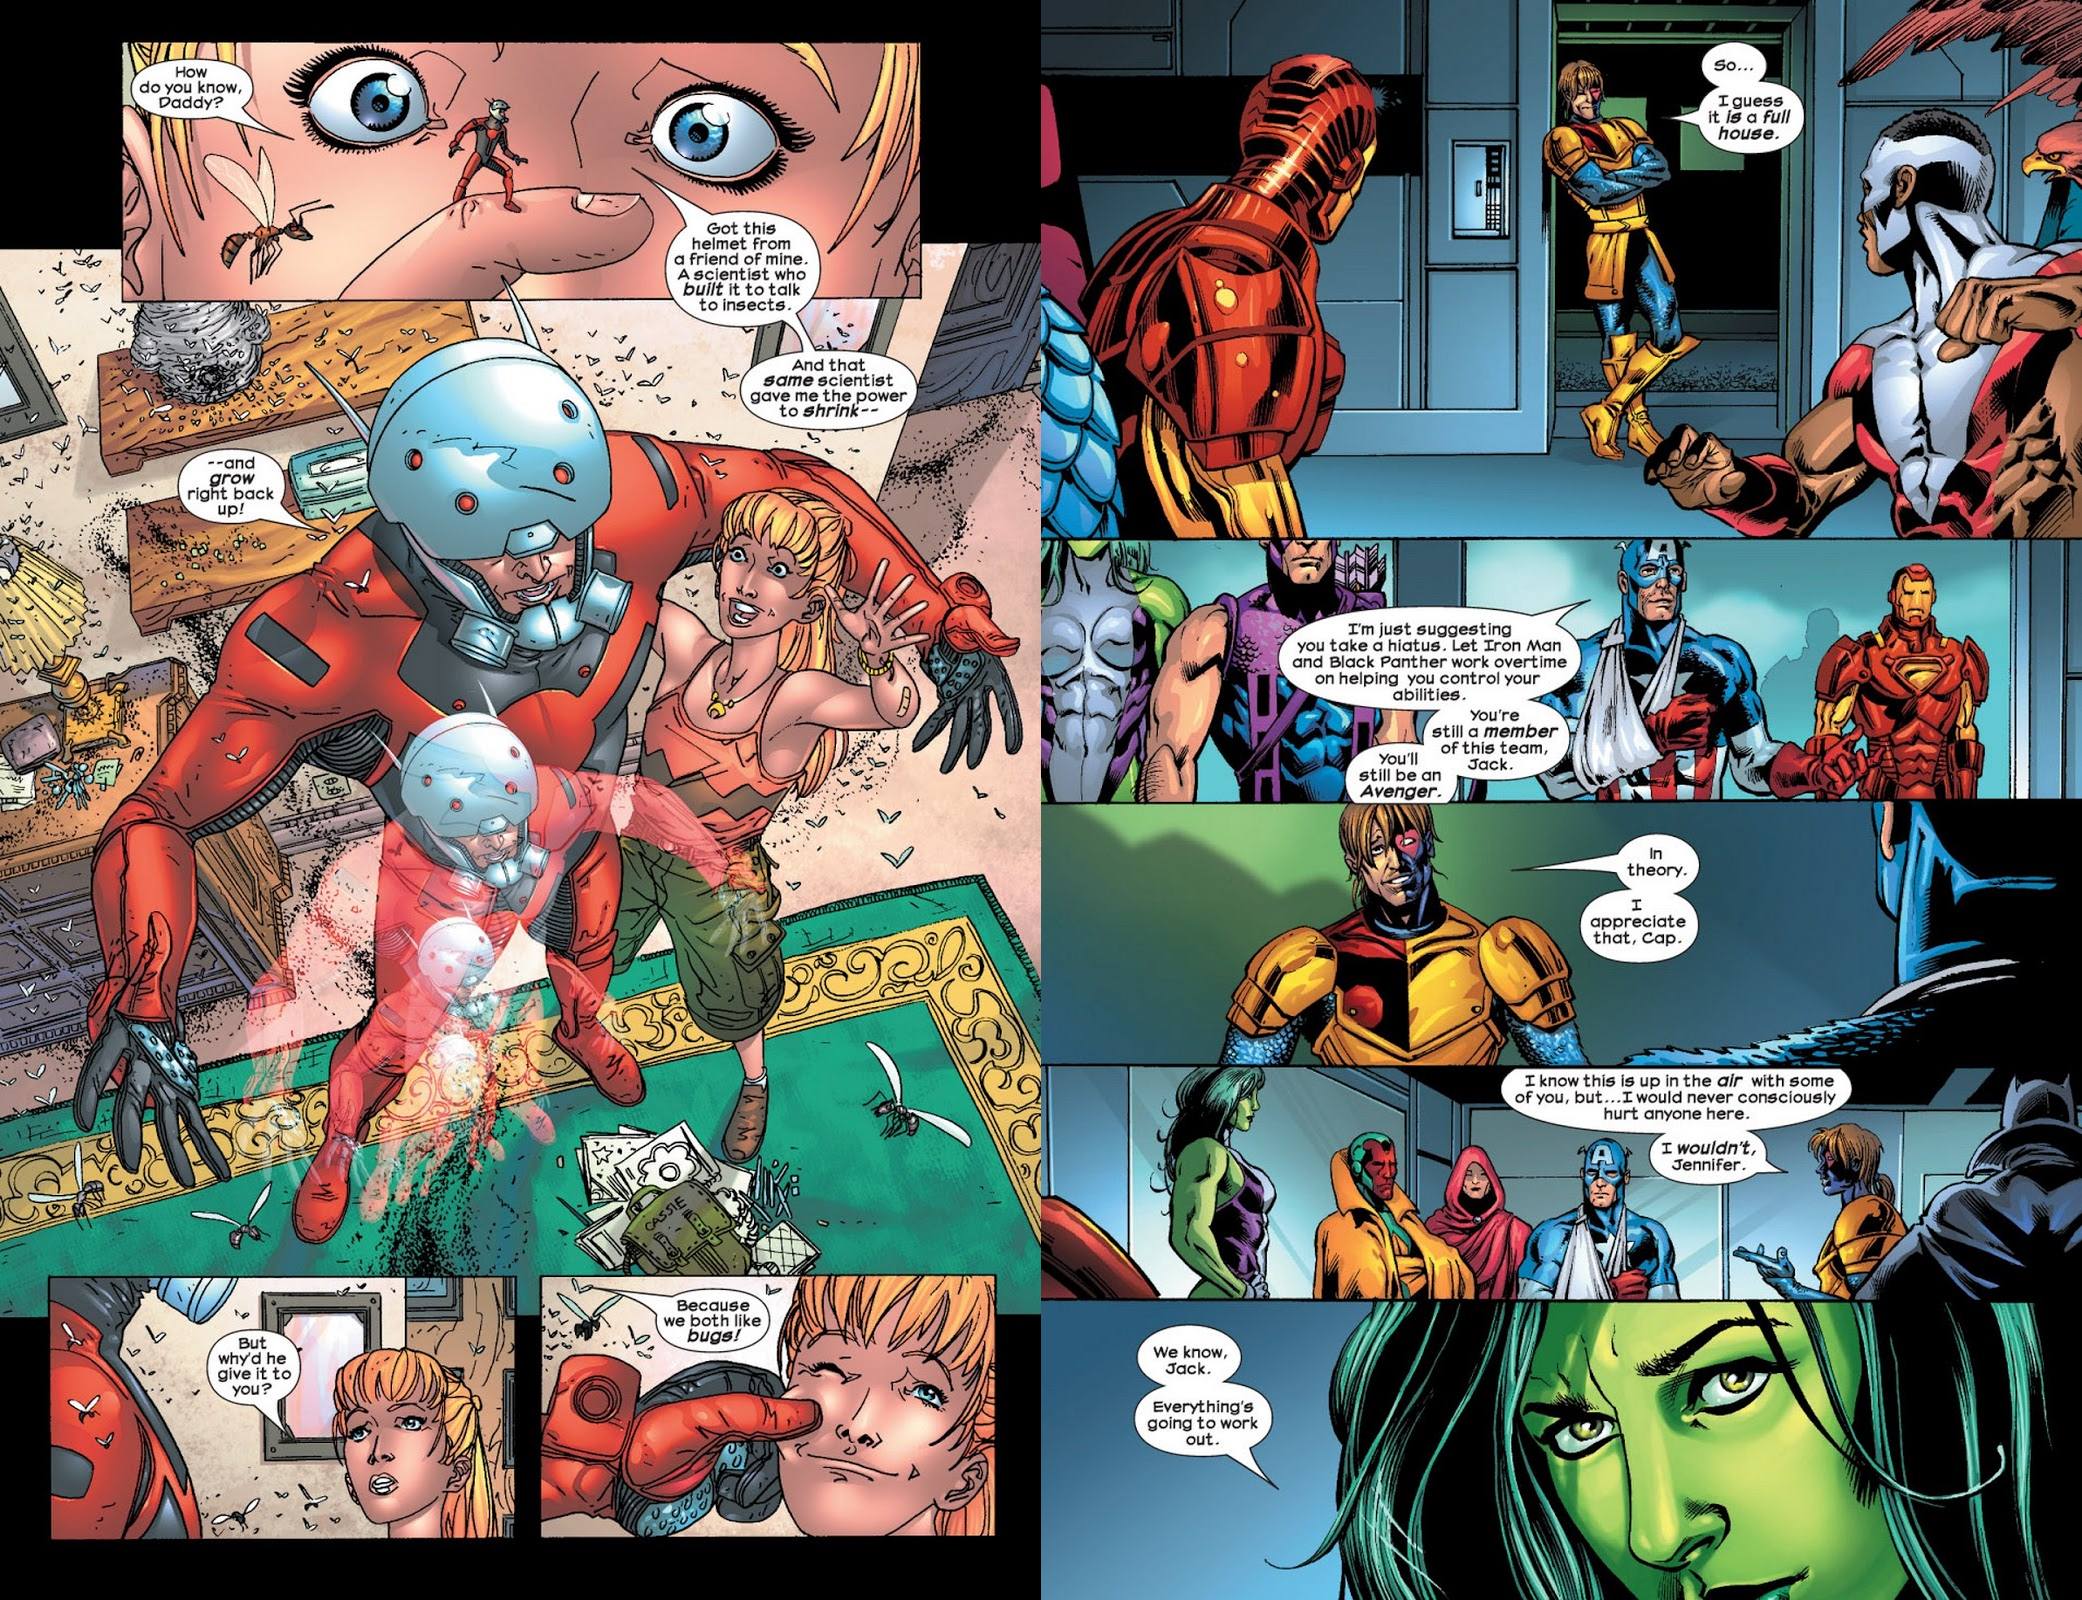 The Avengers The Search for She-Hulk review